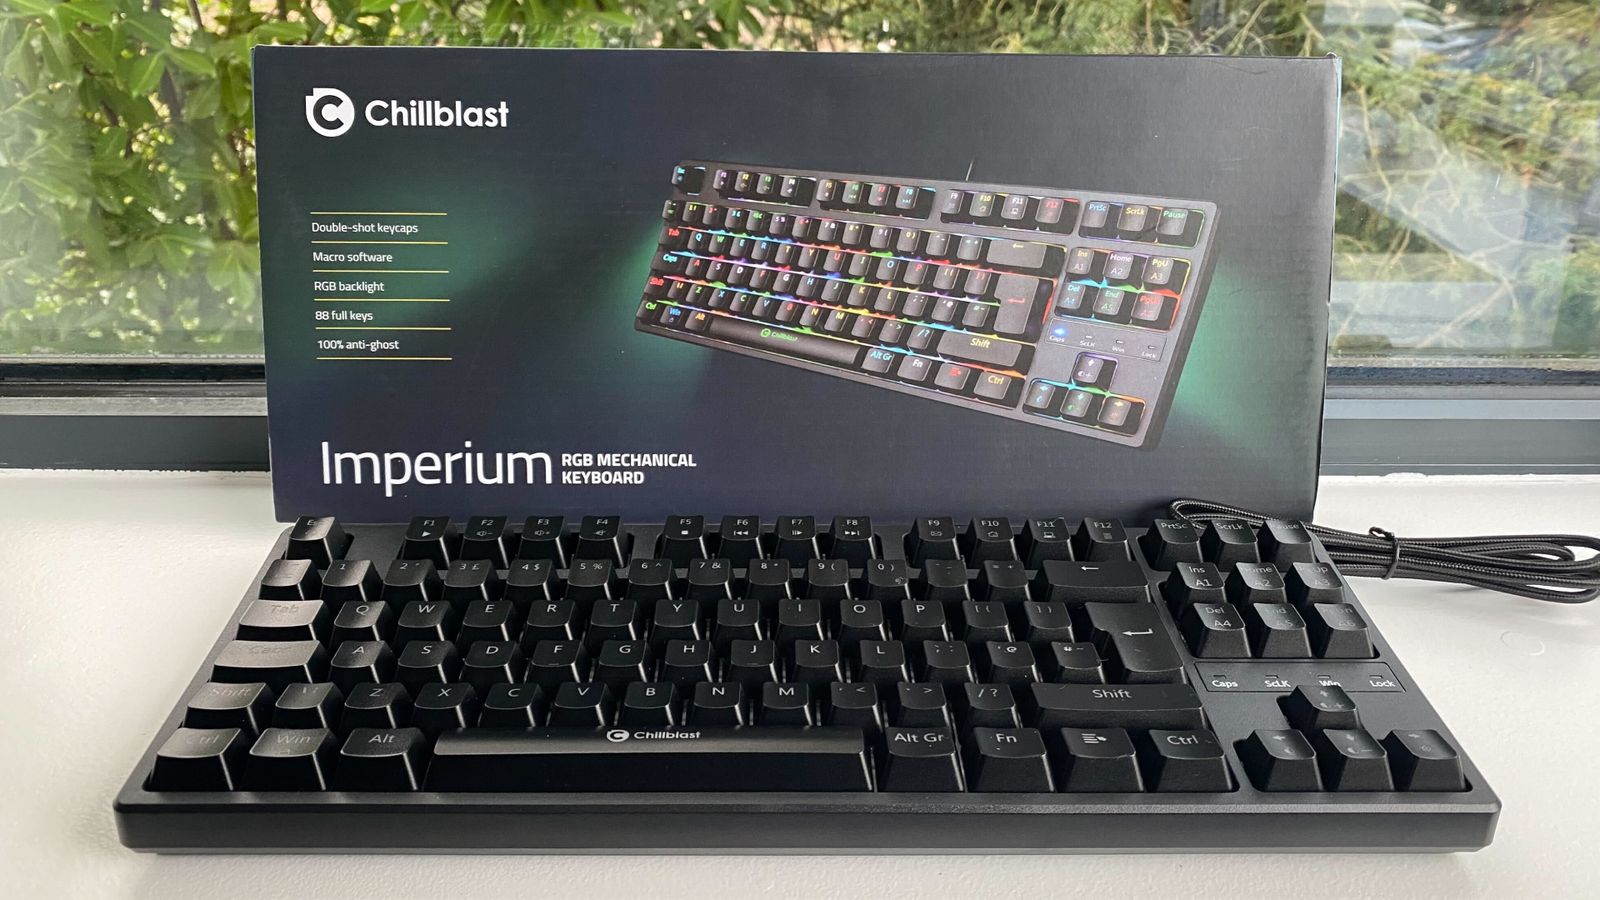 A black keyboard in front of a box.